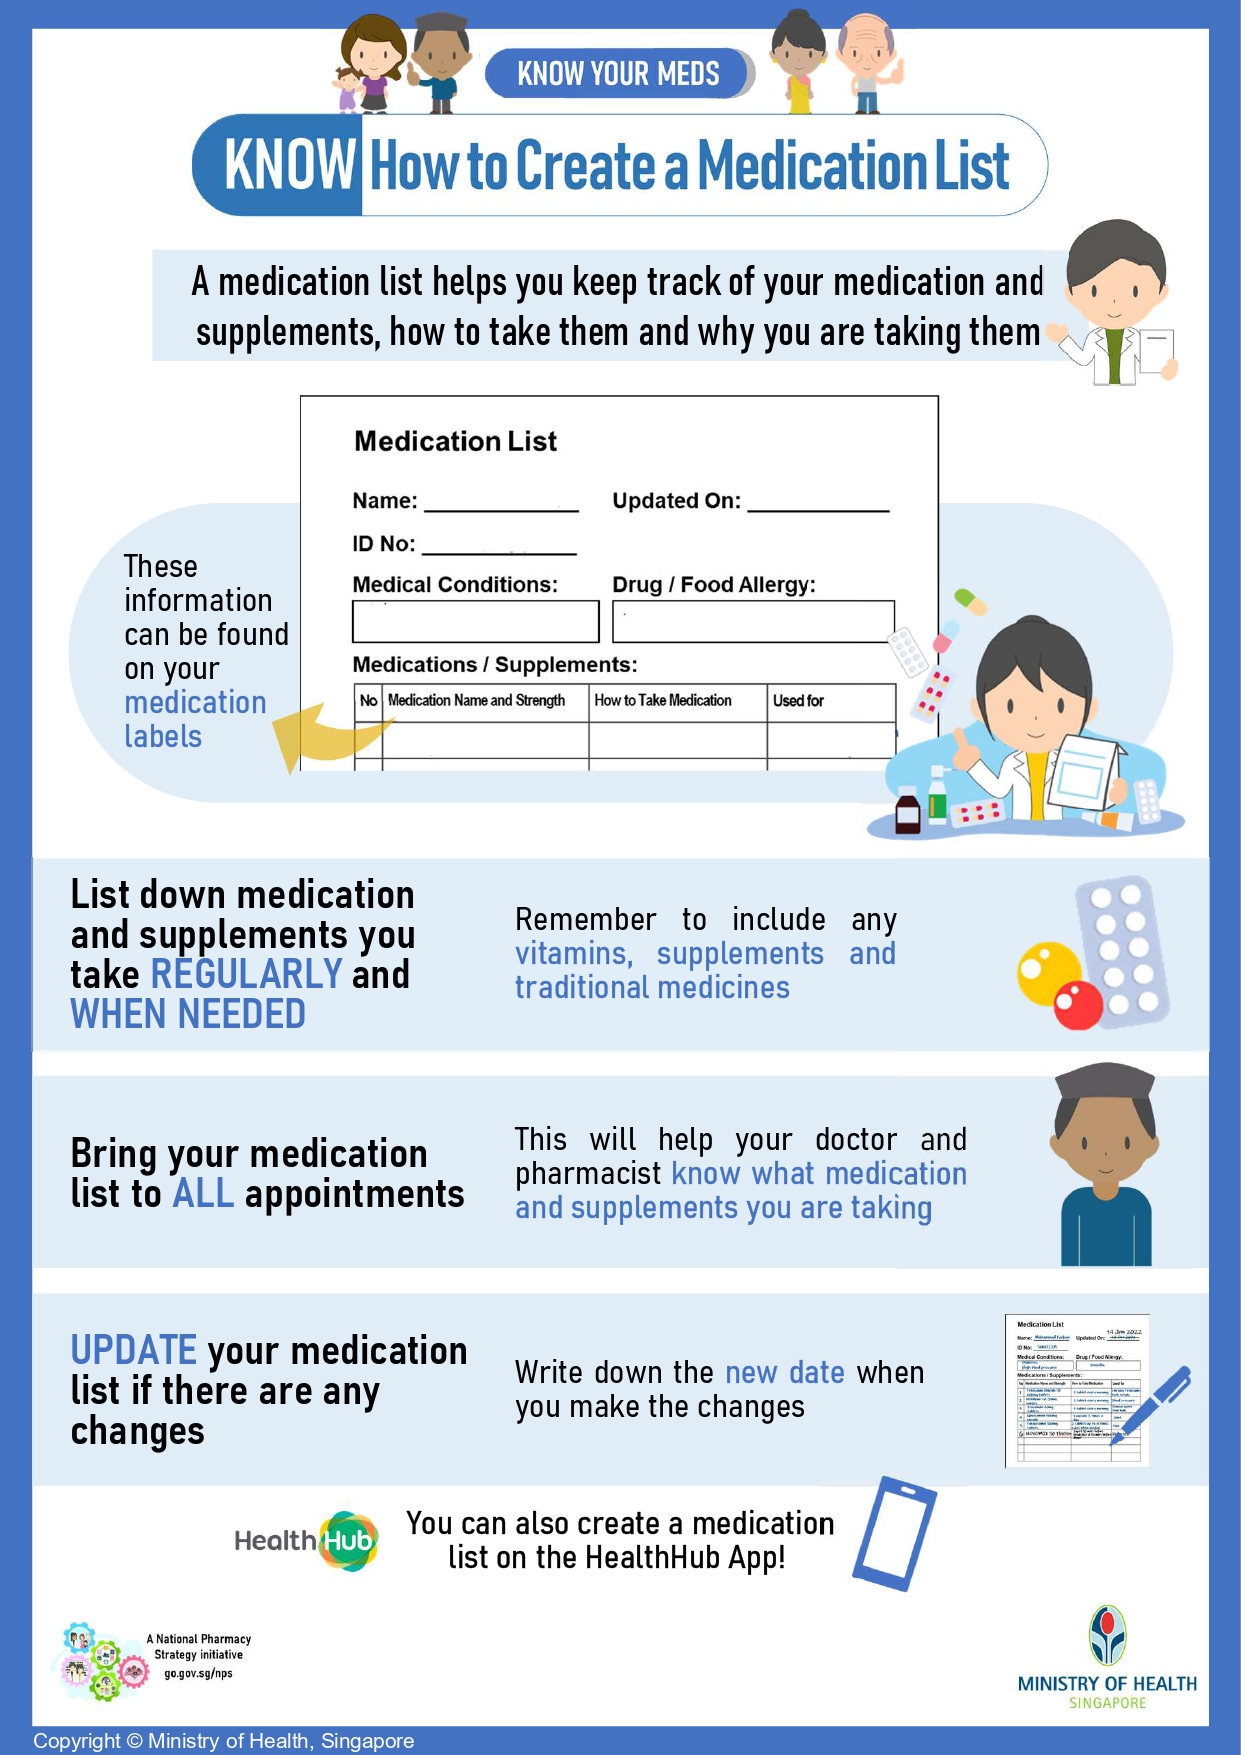 5. Know How to Create a Medication List